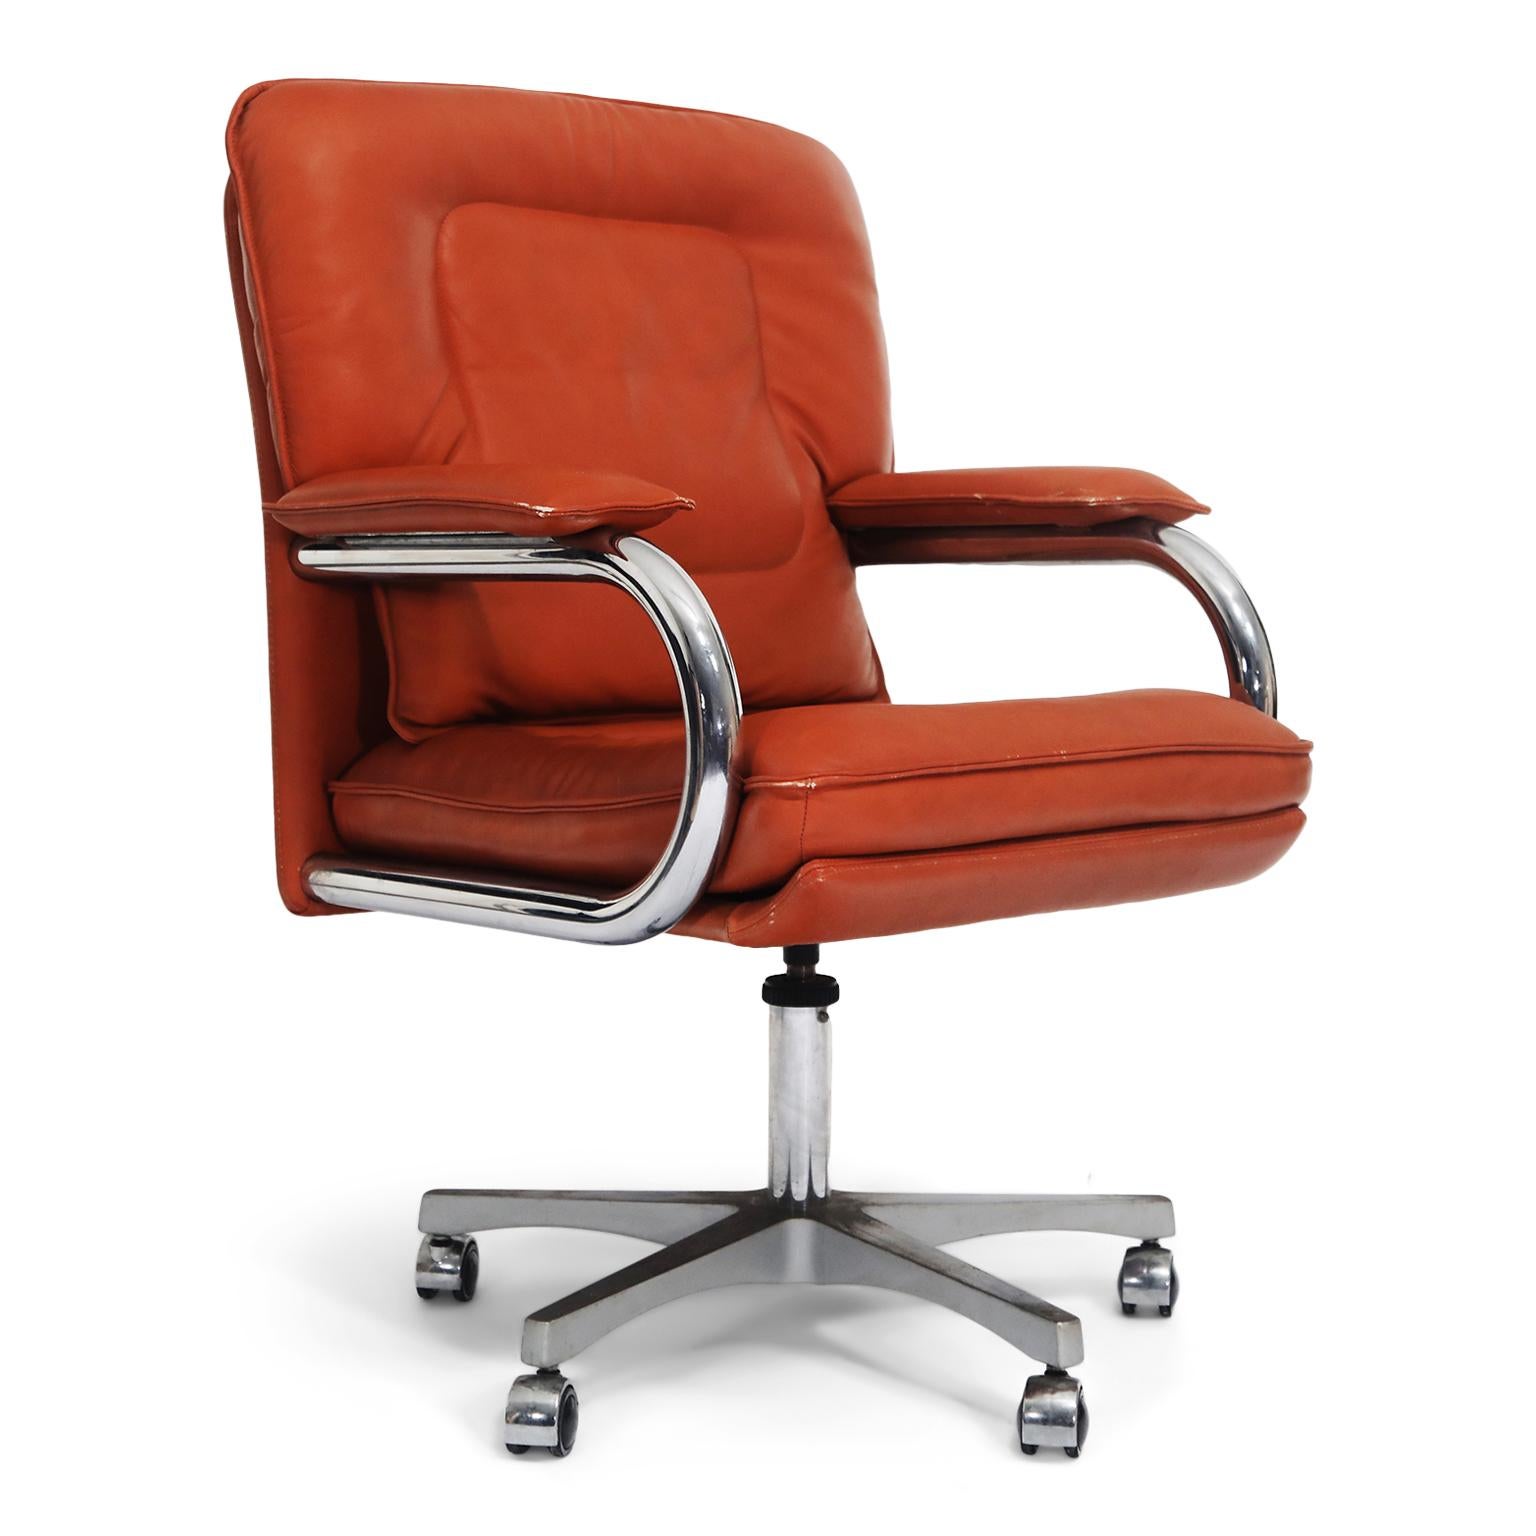 Elegant Guido Faleschini swivel desk chairs by i4 Mariani for The Pace collection. The double-cushioned seats and backs retain the original high-quality and supple caramel leather upholstery. The cushioned seats sits atop a five star chrome base on